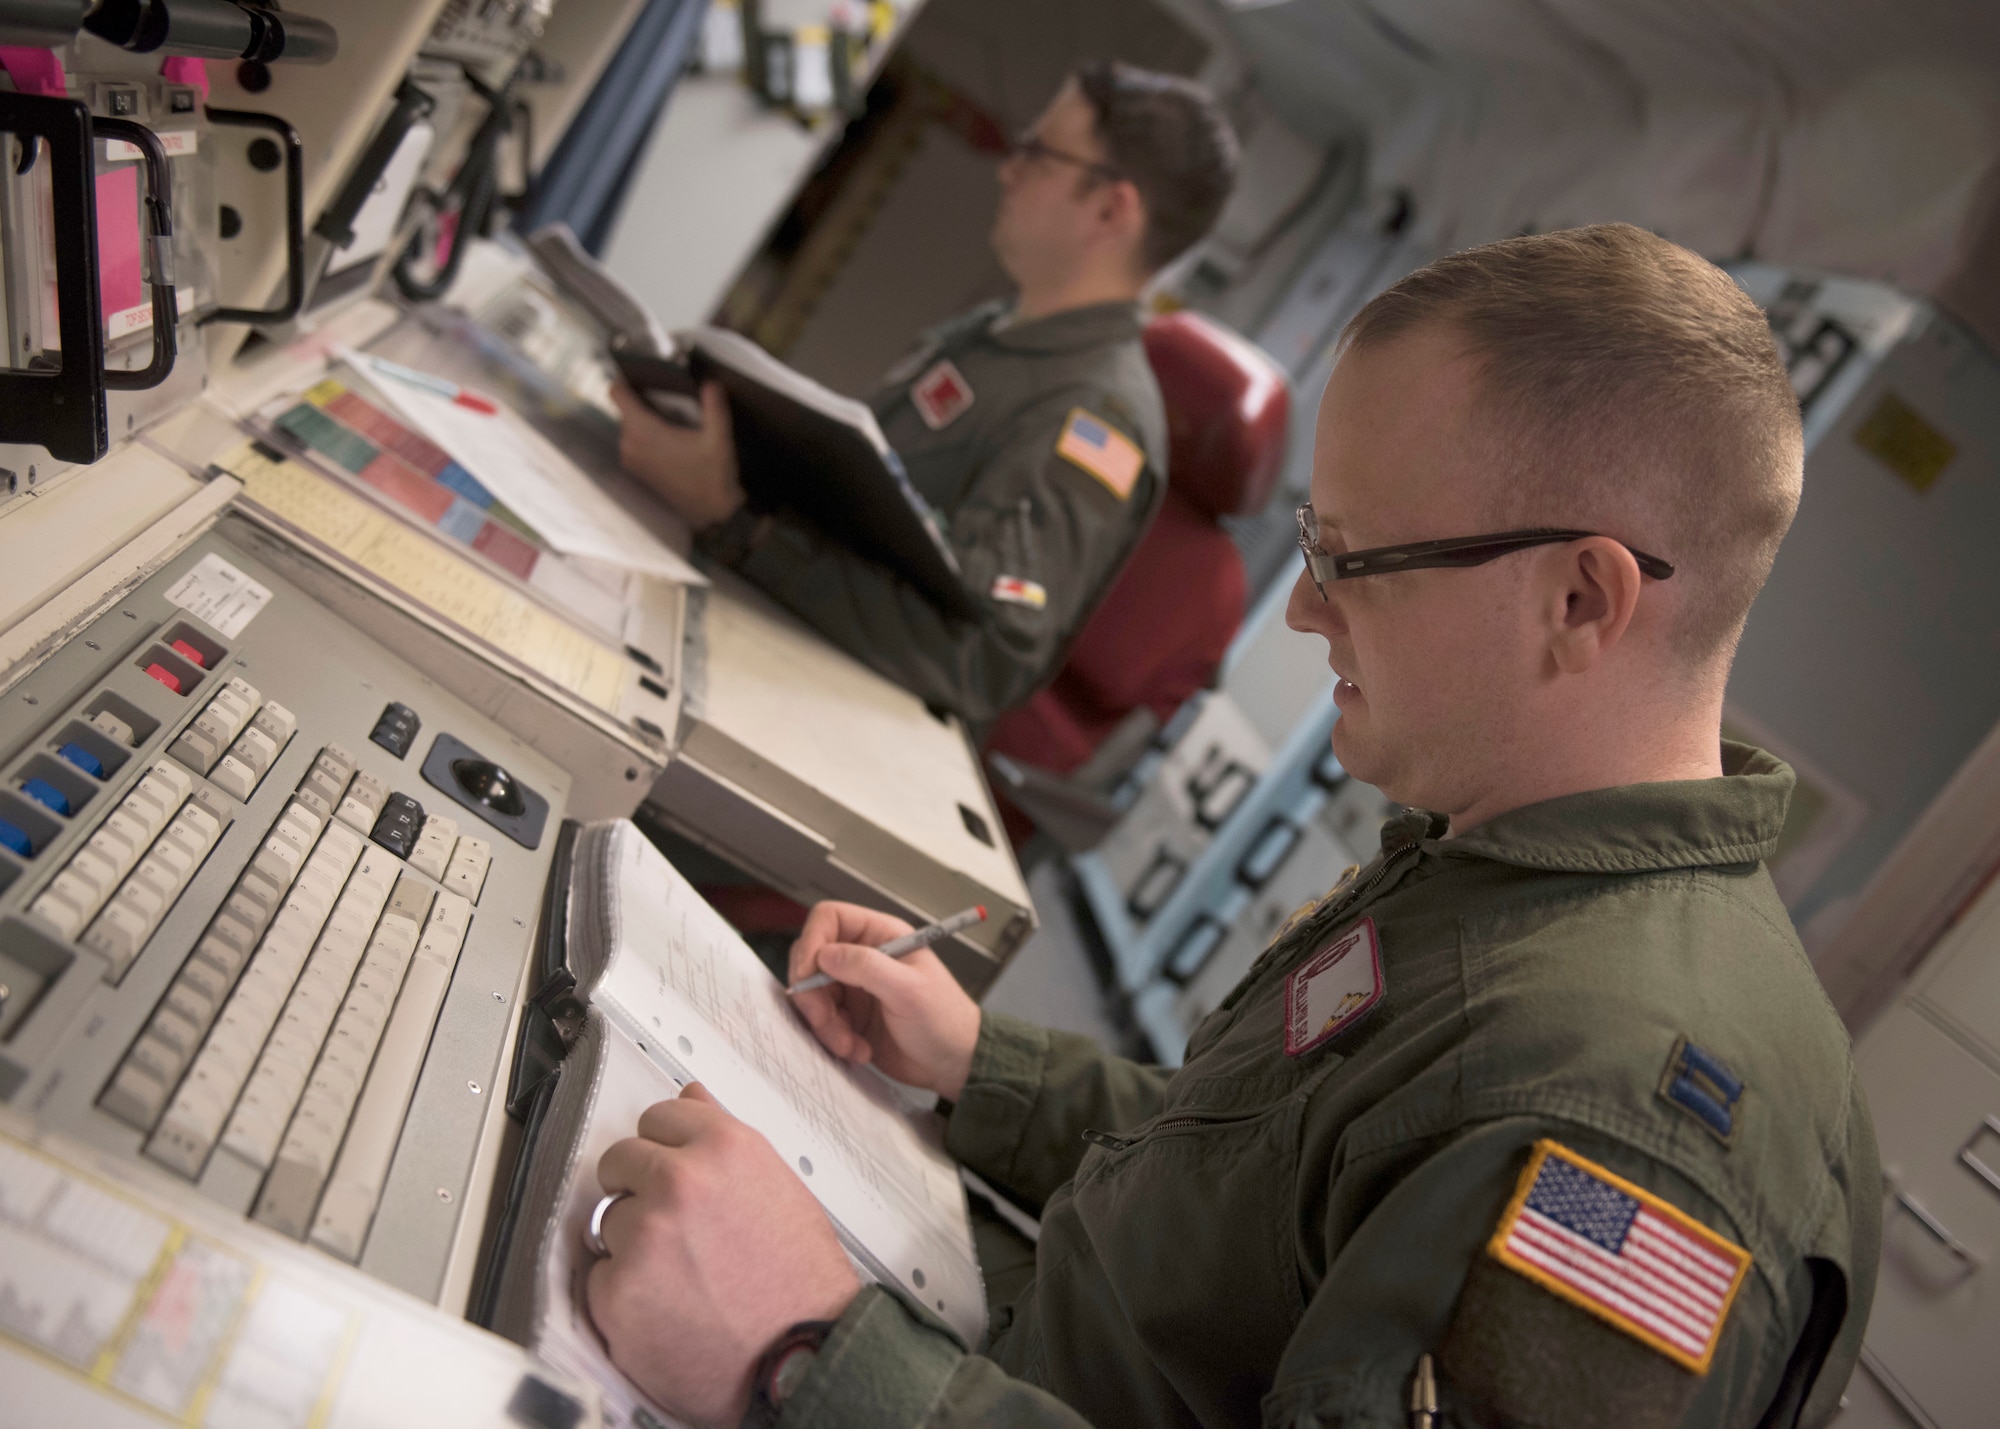 Capt. Ben Shea, right, and 2nd Lt. Taylor Yost review missile alert facility checklists during Shea's first alert as an individual mobilization augmentee. (Photos by Senior Airman Alyssa M. Akers)